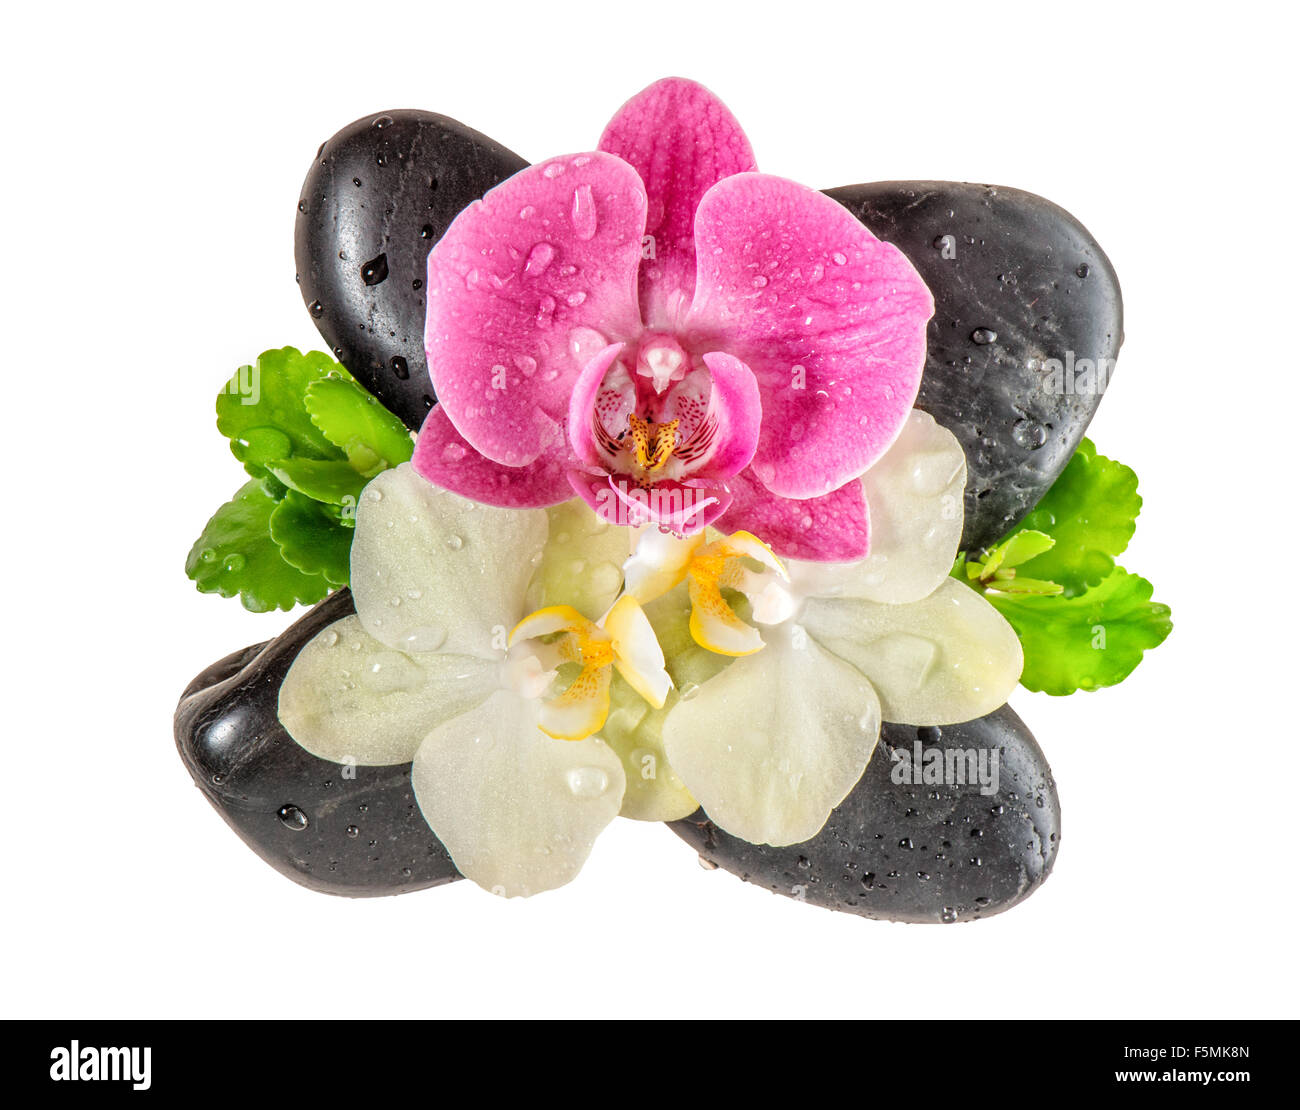 Orchid flower with water drops and black stones isolated on white background. Fresh blossoms Stock Photo